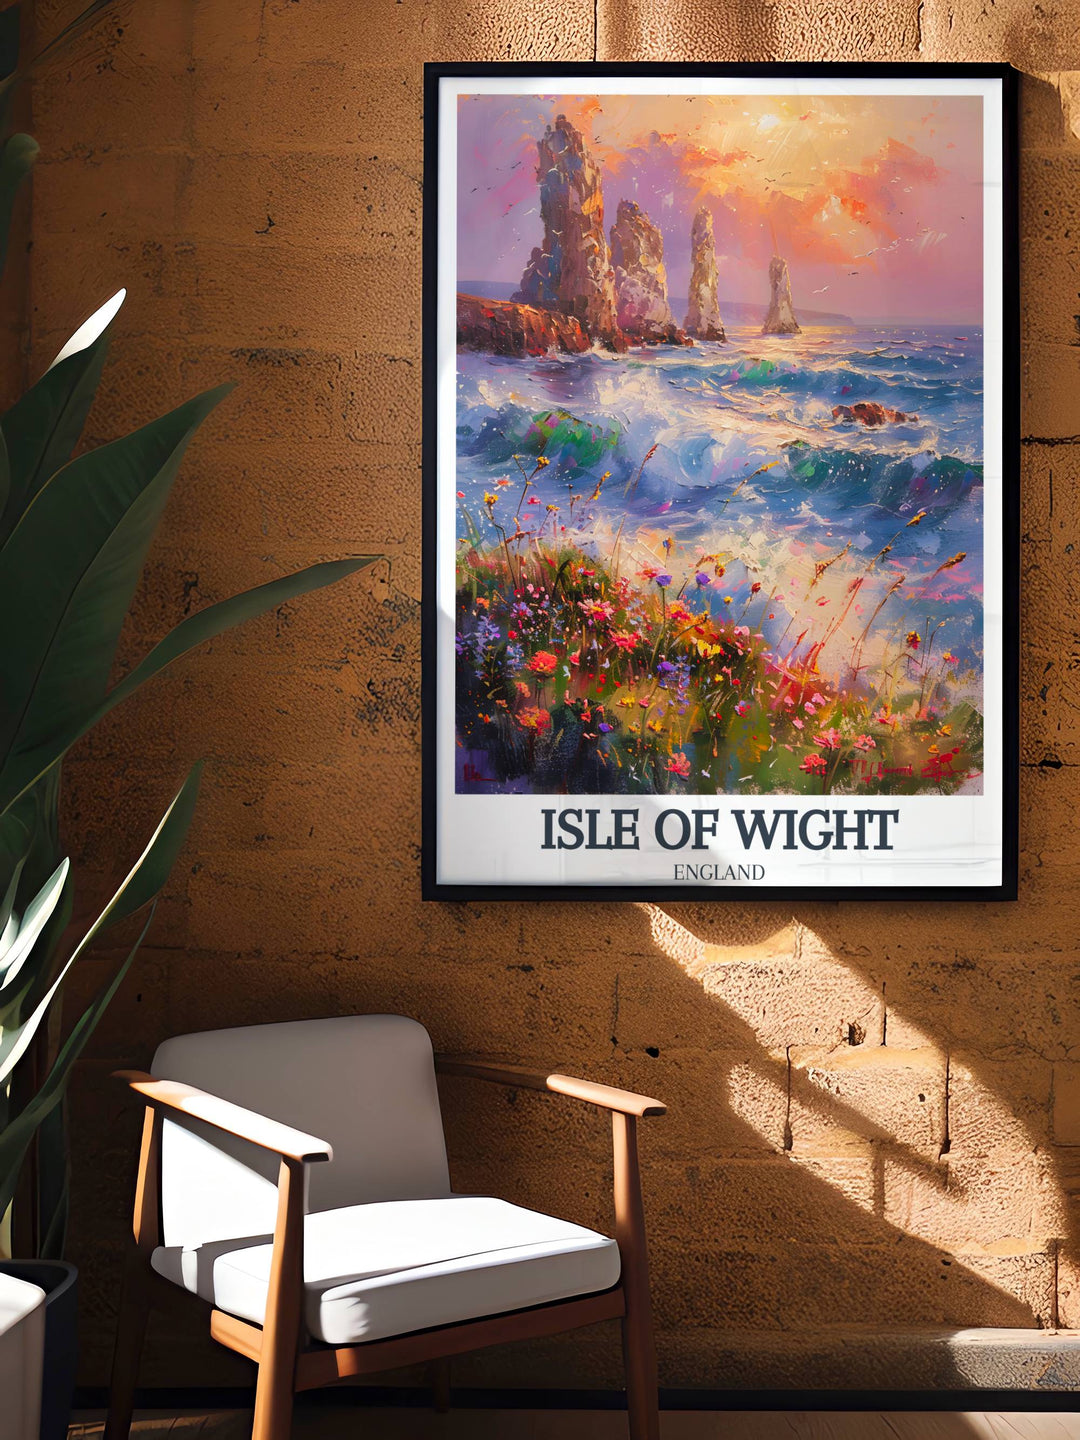 Artistic collage including The Needles Lighthouse during Isle of Wight's cultural events like music festivals and regattas, captured in a lively, expressive style, perfect for a living room or entertainment area.